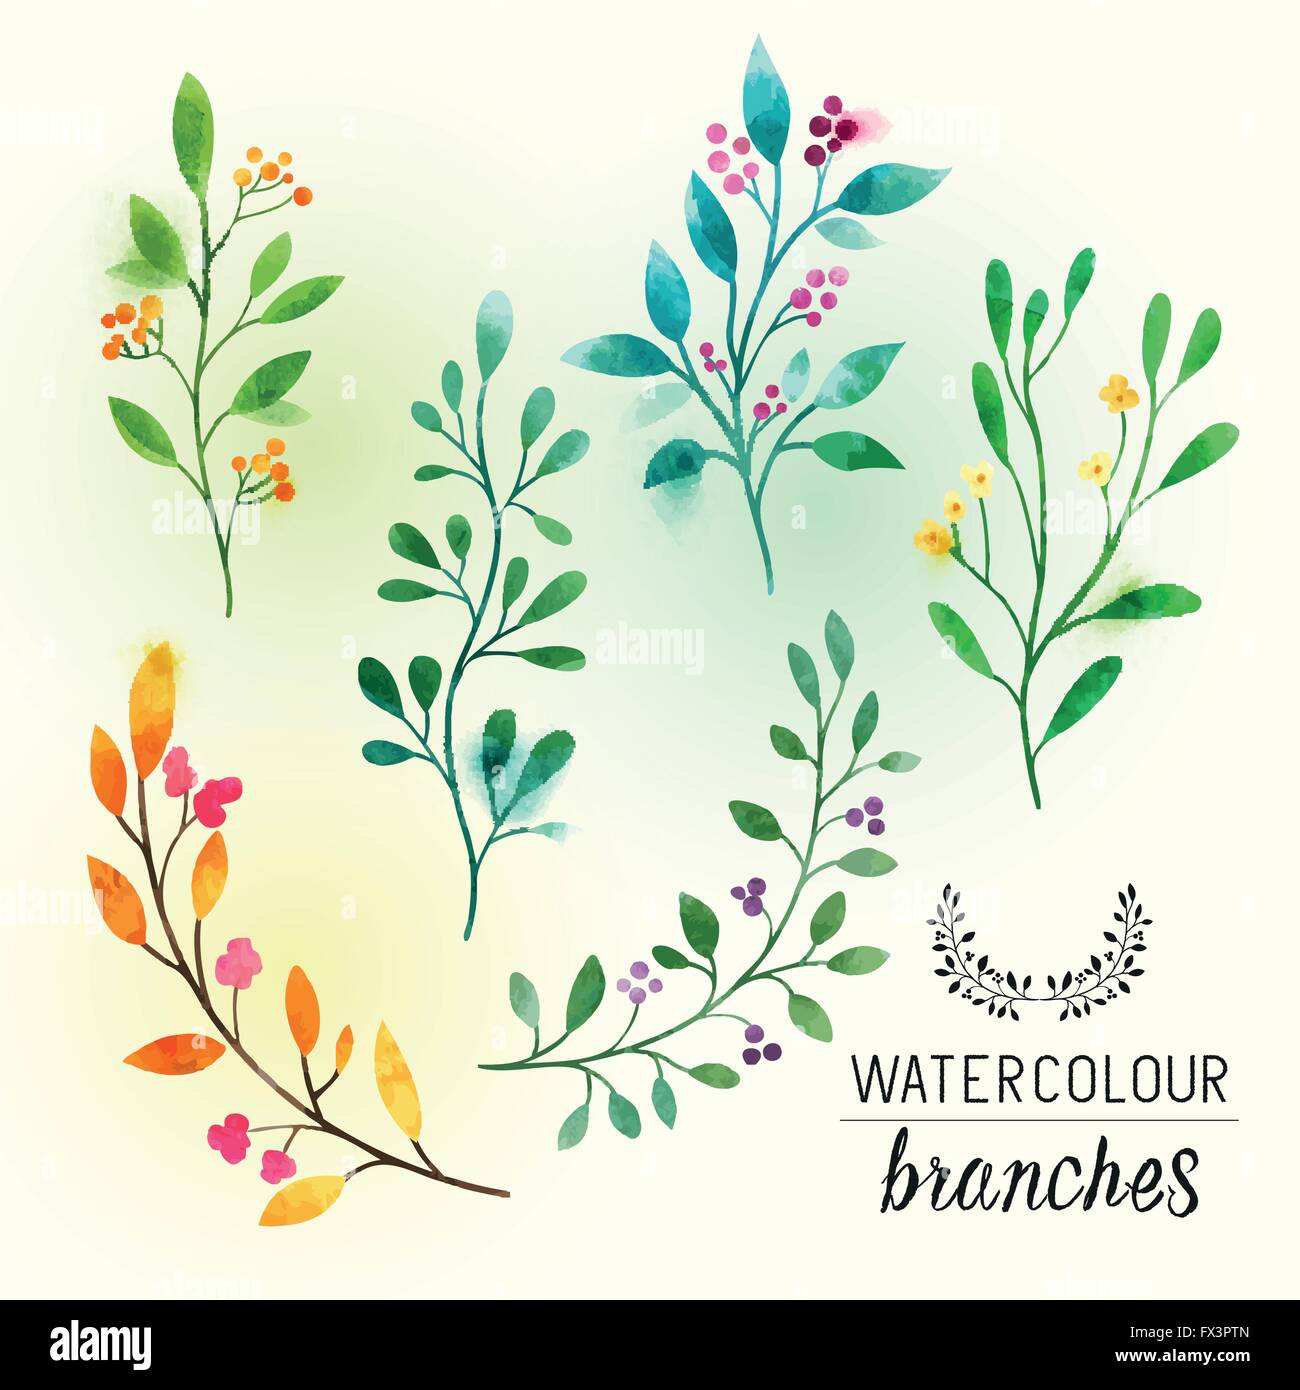 watercolour Floral Branches. Textured floral elements with pink berries. Vector illustration. Stock Vector